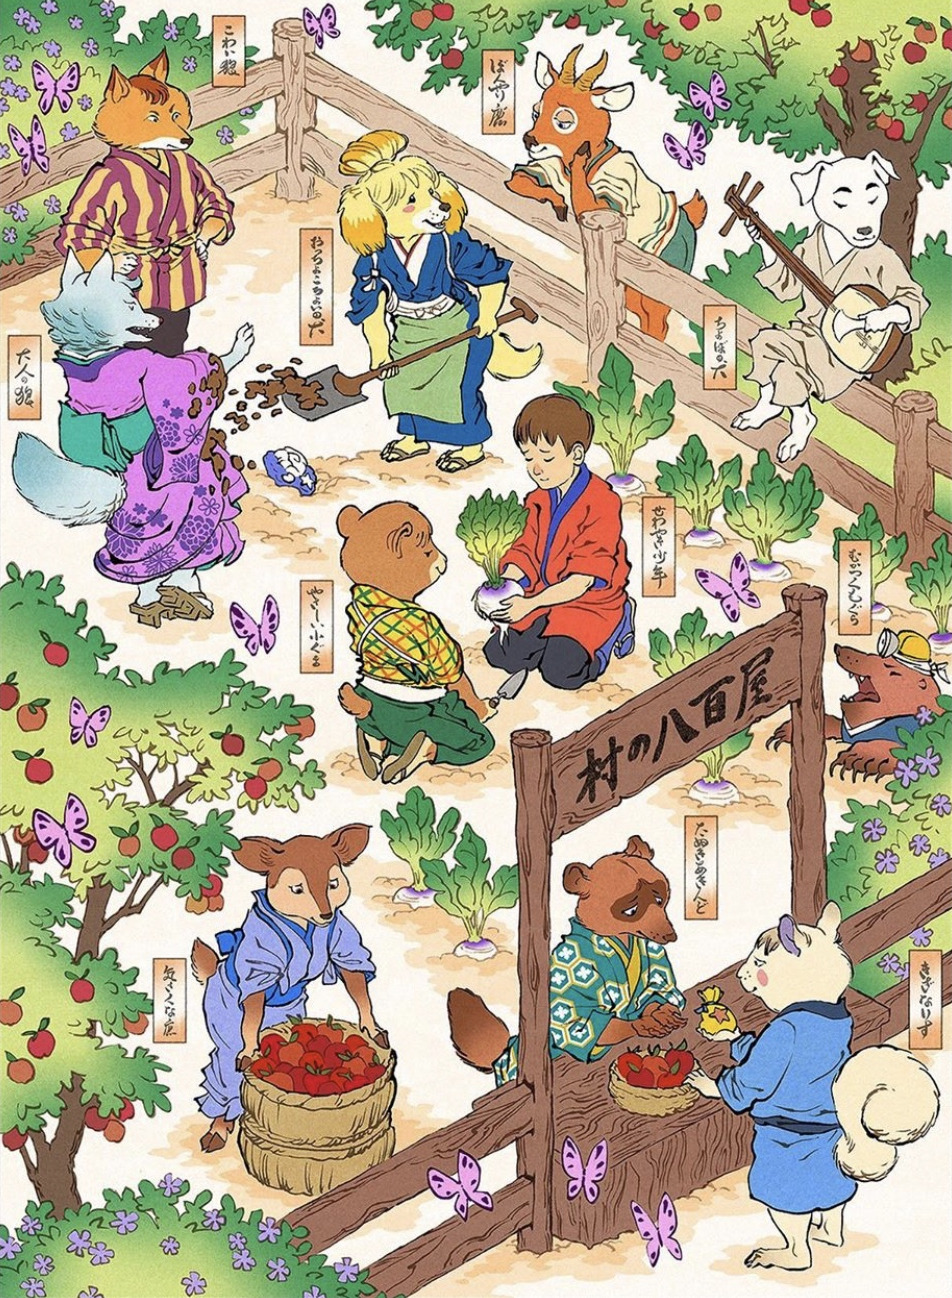 retrogamingblog2:Nintendo Characters in Traditional Japanese Art Style